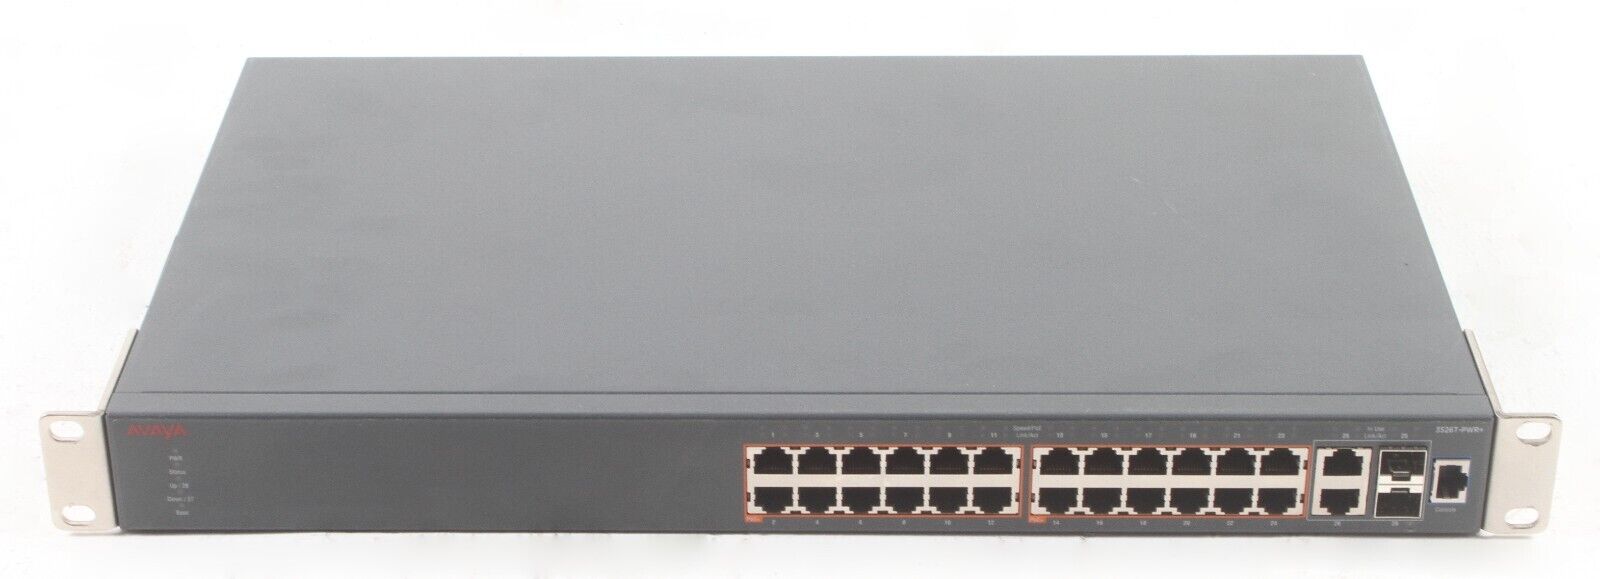 Avaya 3526T-PWR+ 24-Port Manageable PoE+ Fast Ethernet Switch; 6145543